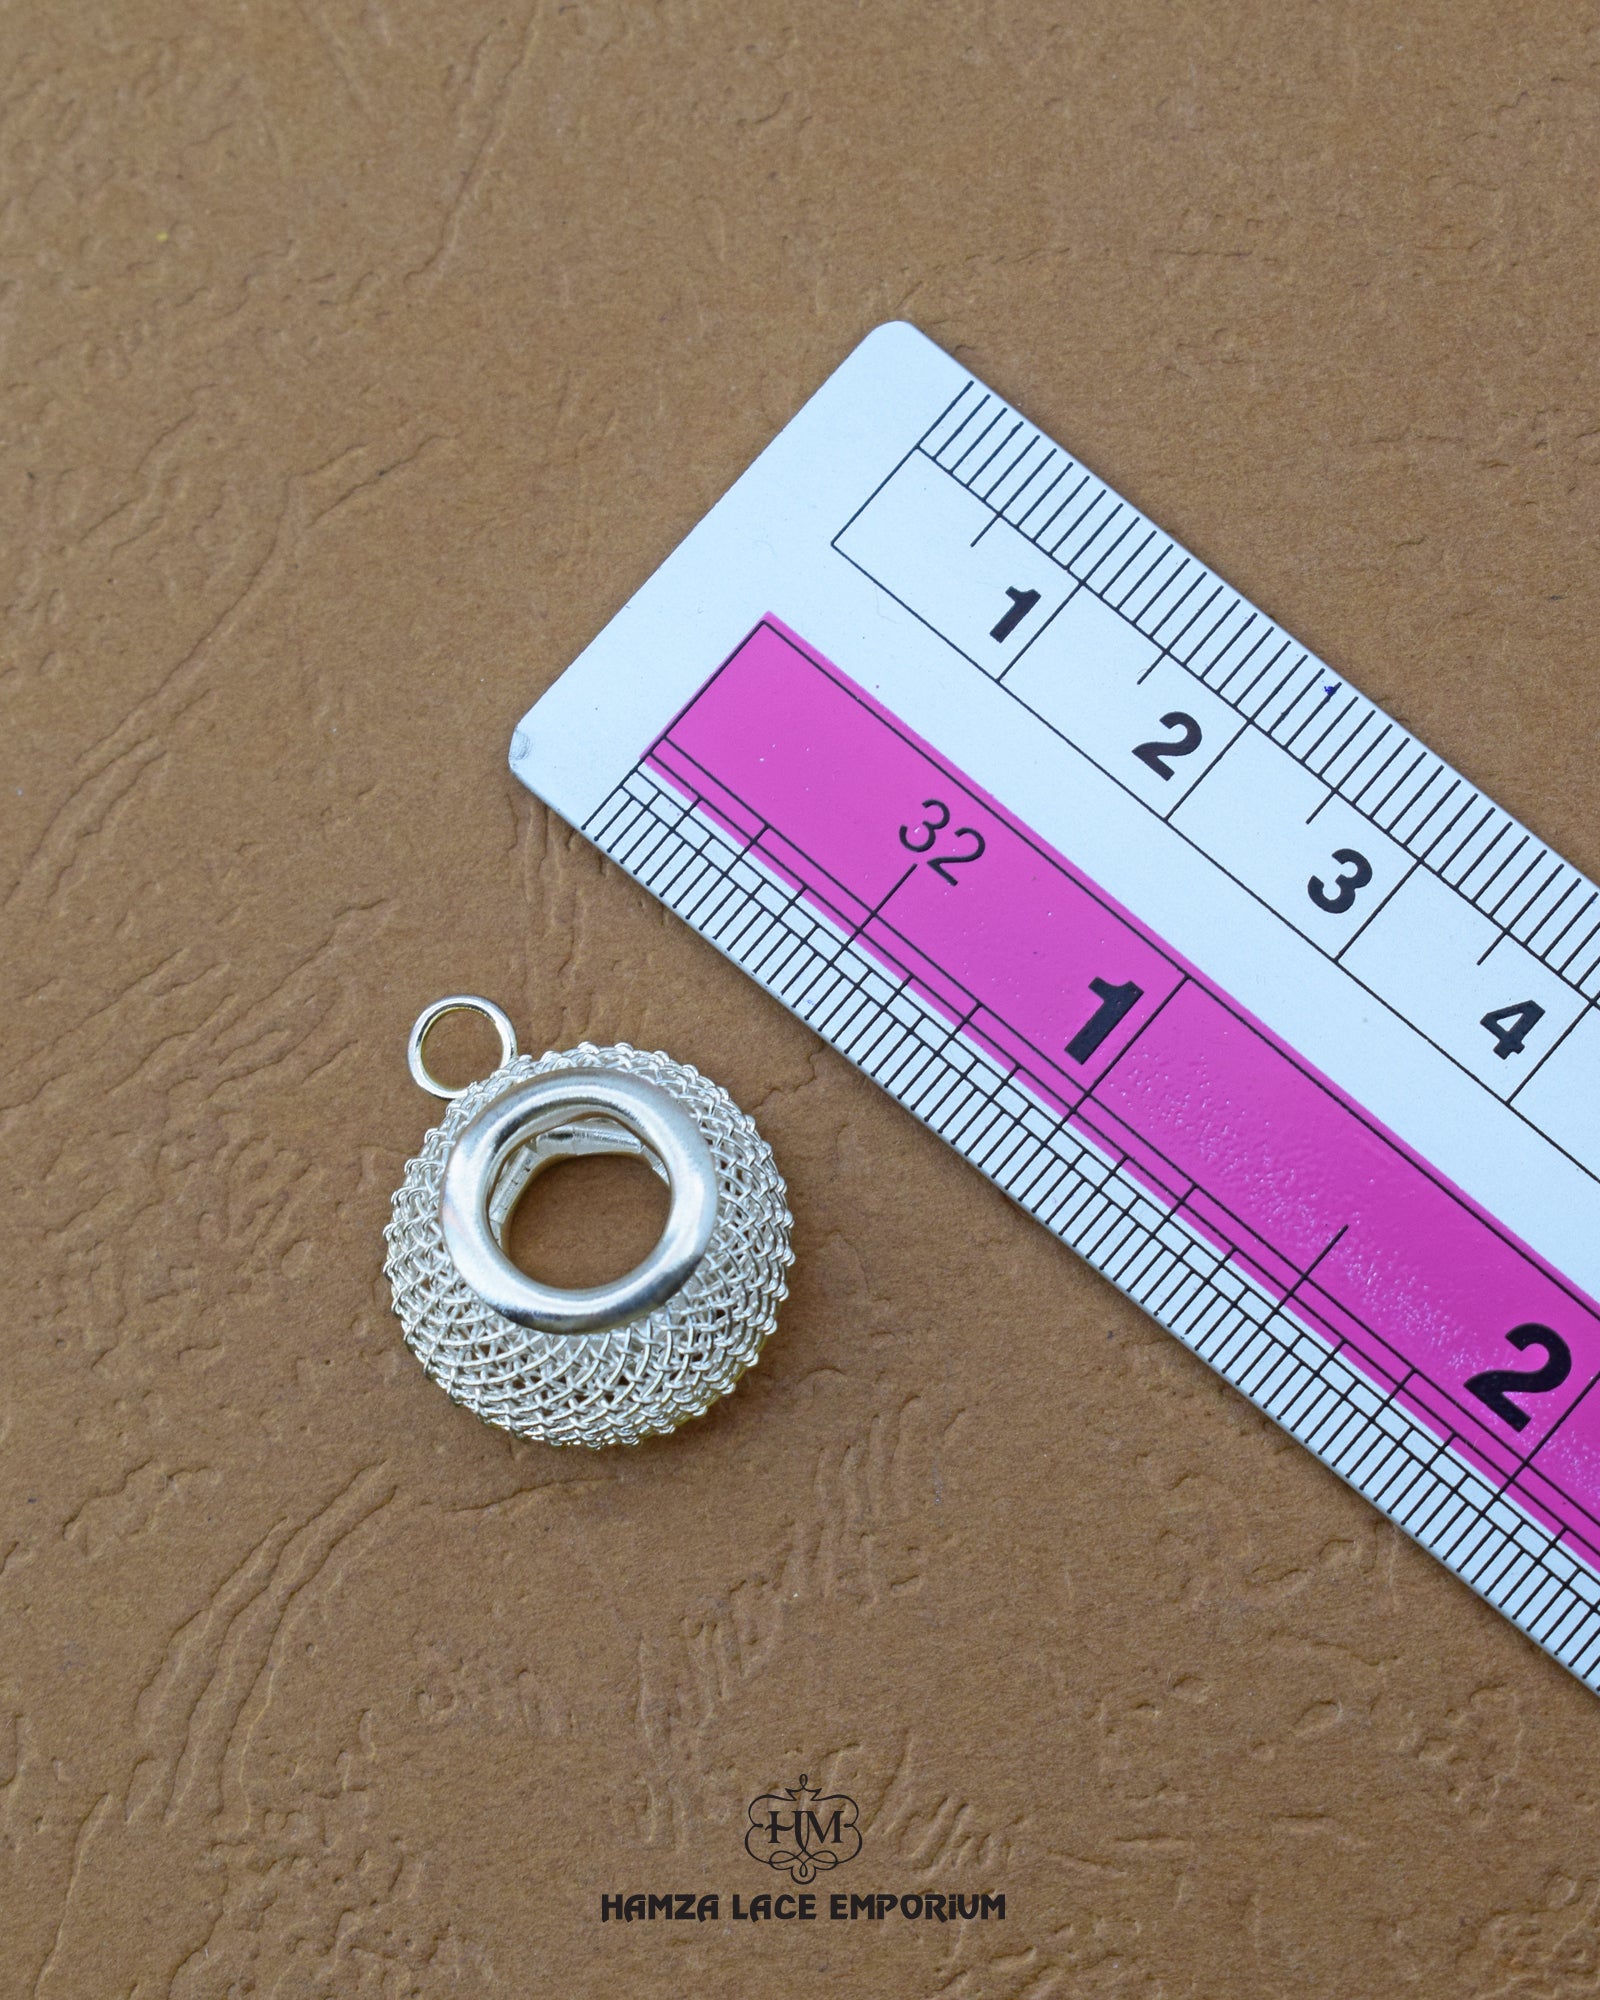 Elegant 'Metal Accessory MA104' for Clothing (Size shown with ruler)